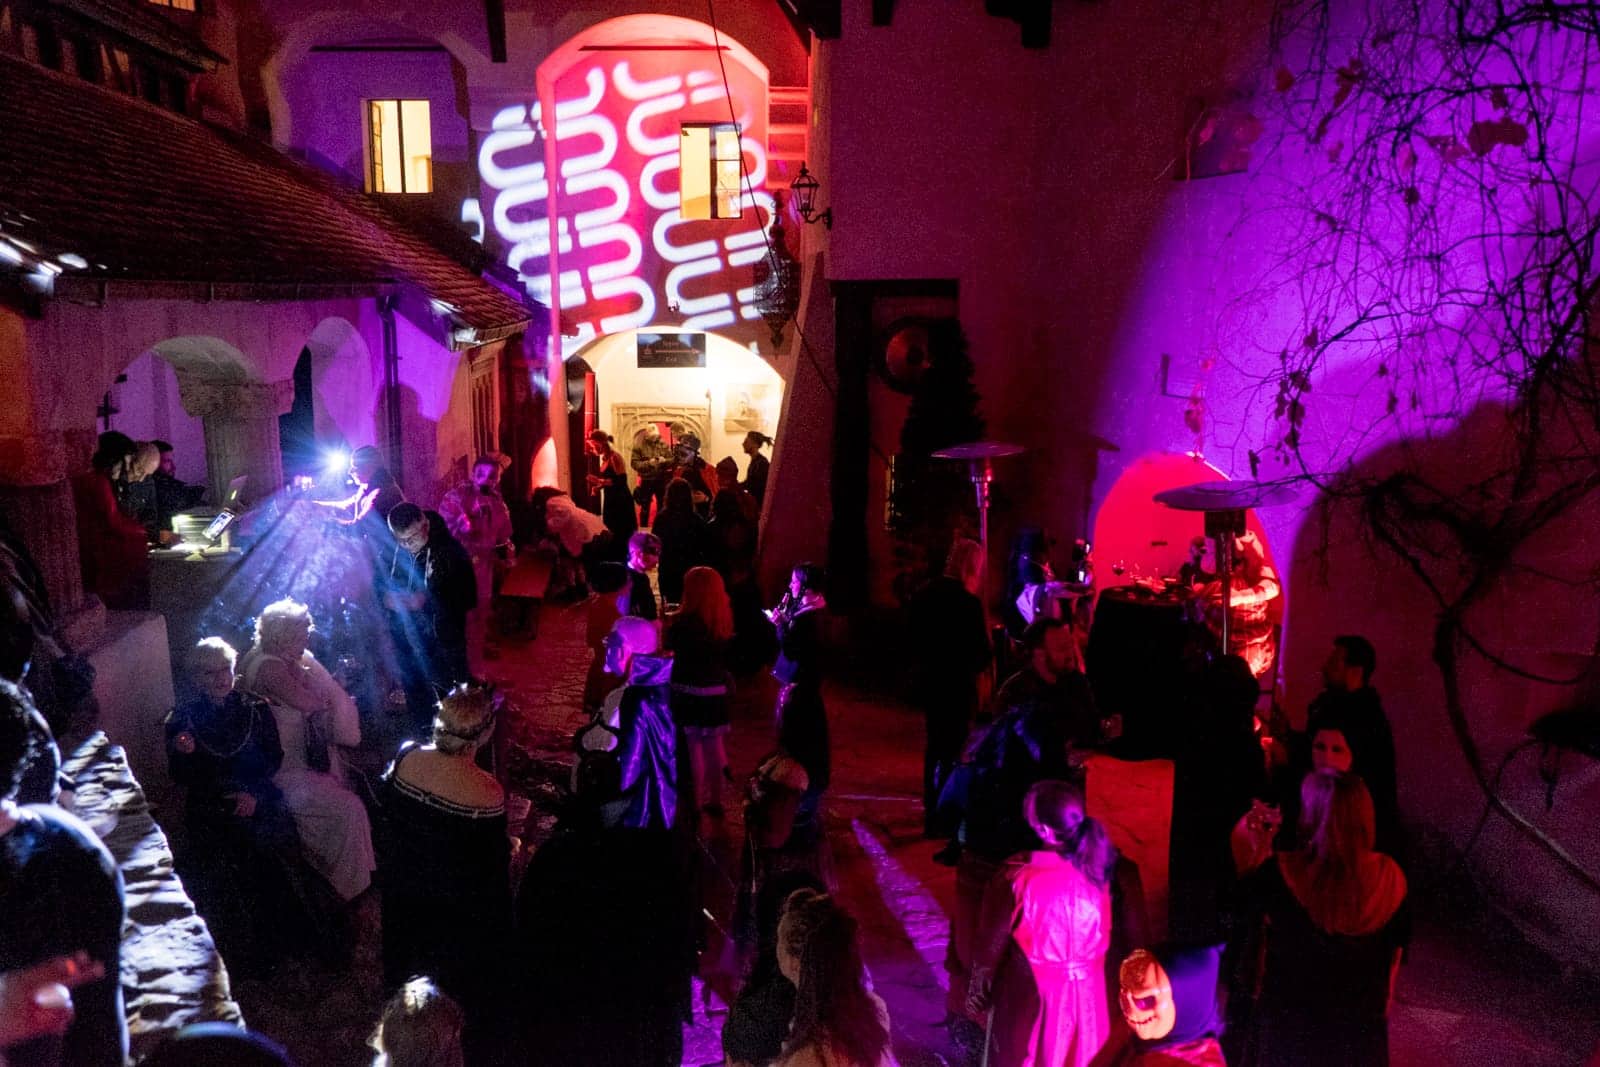 The pink lights and costumed partygoers at a Halloween party in Bran Castle, Transylvania, Romania